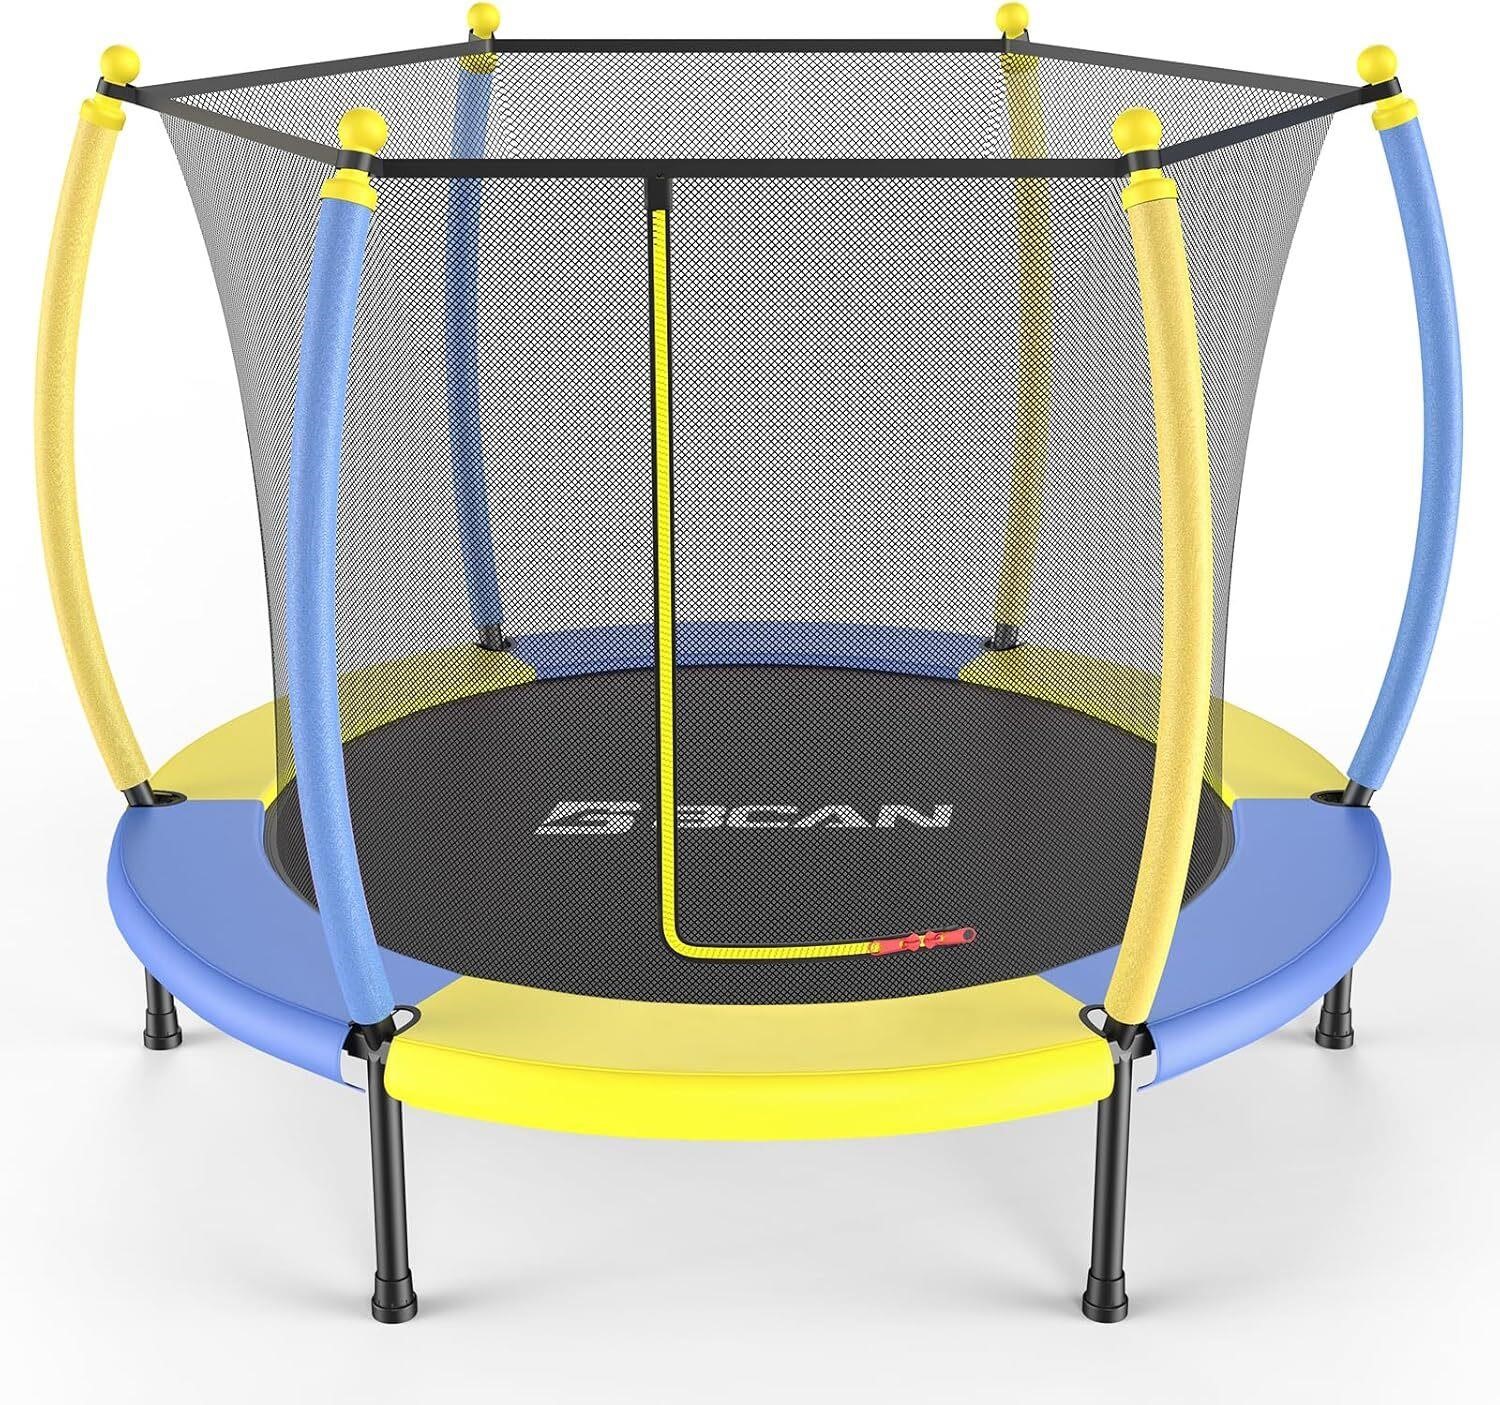 BCAN 60'/48 Mini Trampoline for Ages 1 to 8 Kid